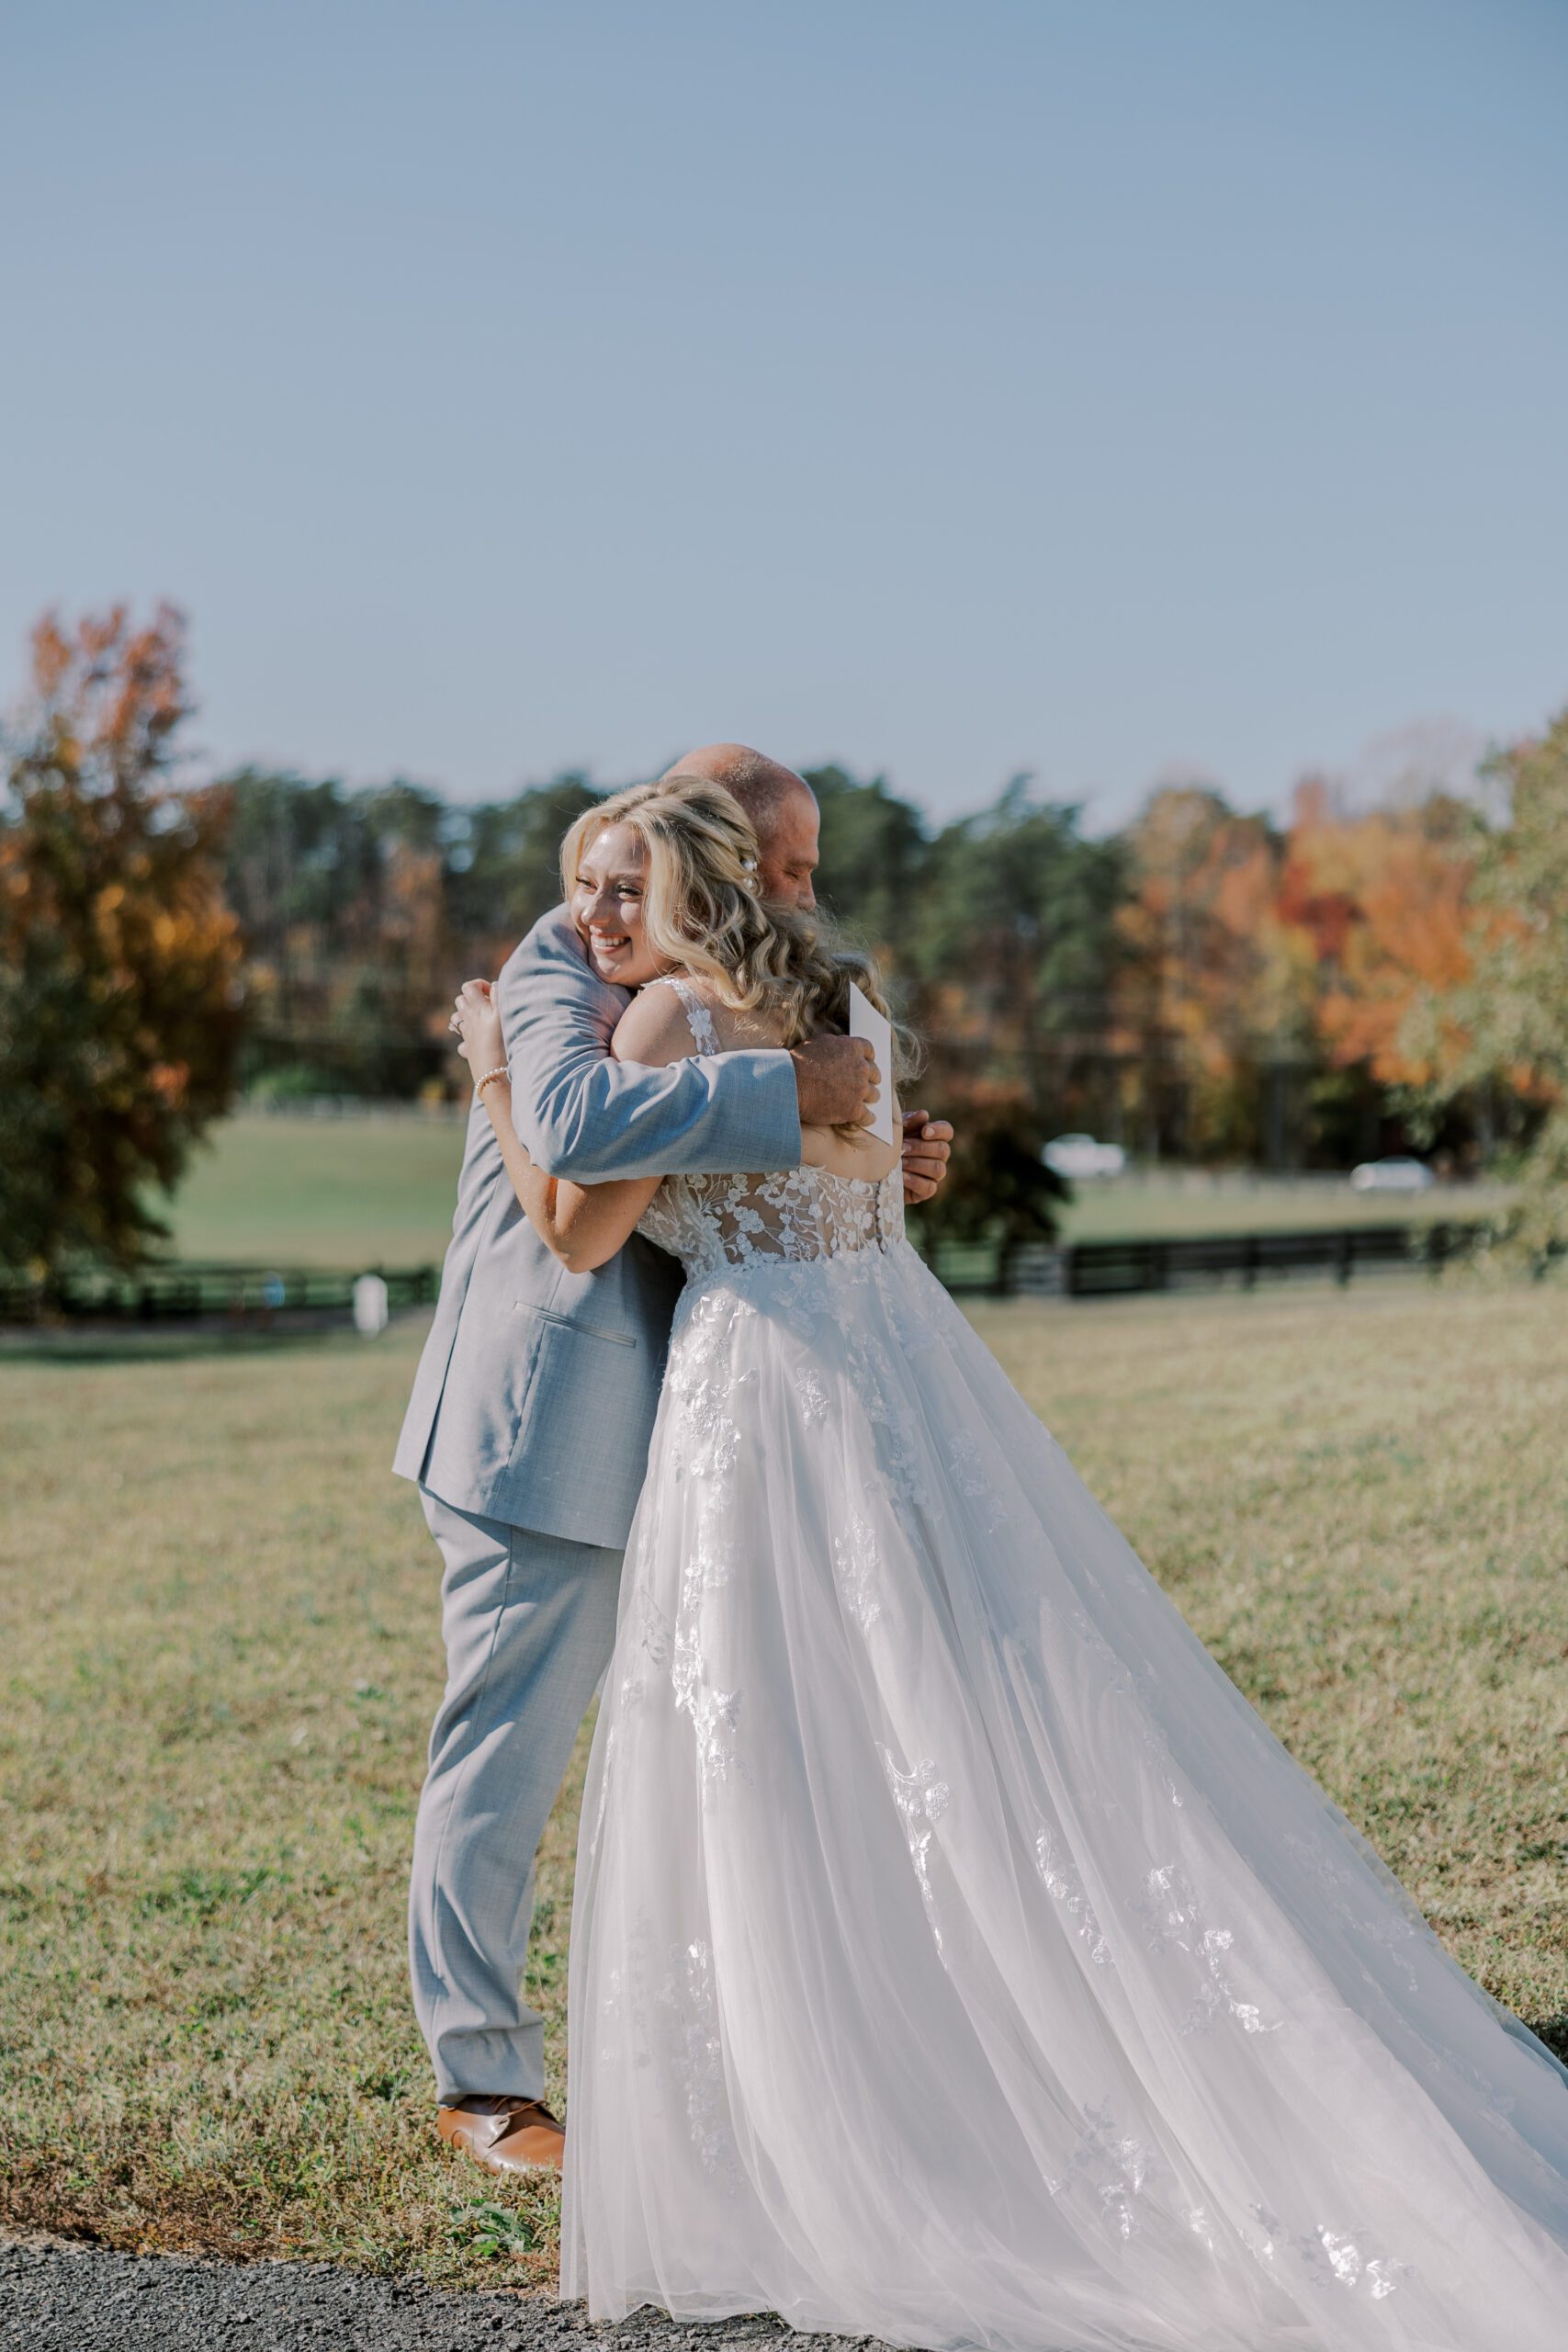 Full length image of bride and her father hugging, back of bride's dress pictured with lots of lace detailing scattered down the skirt of the dress